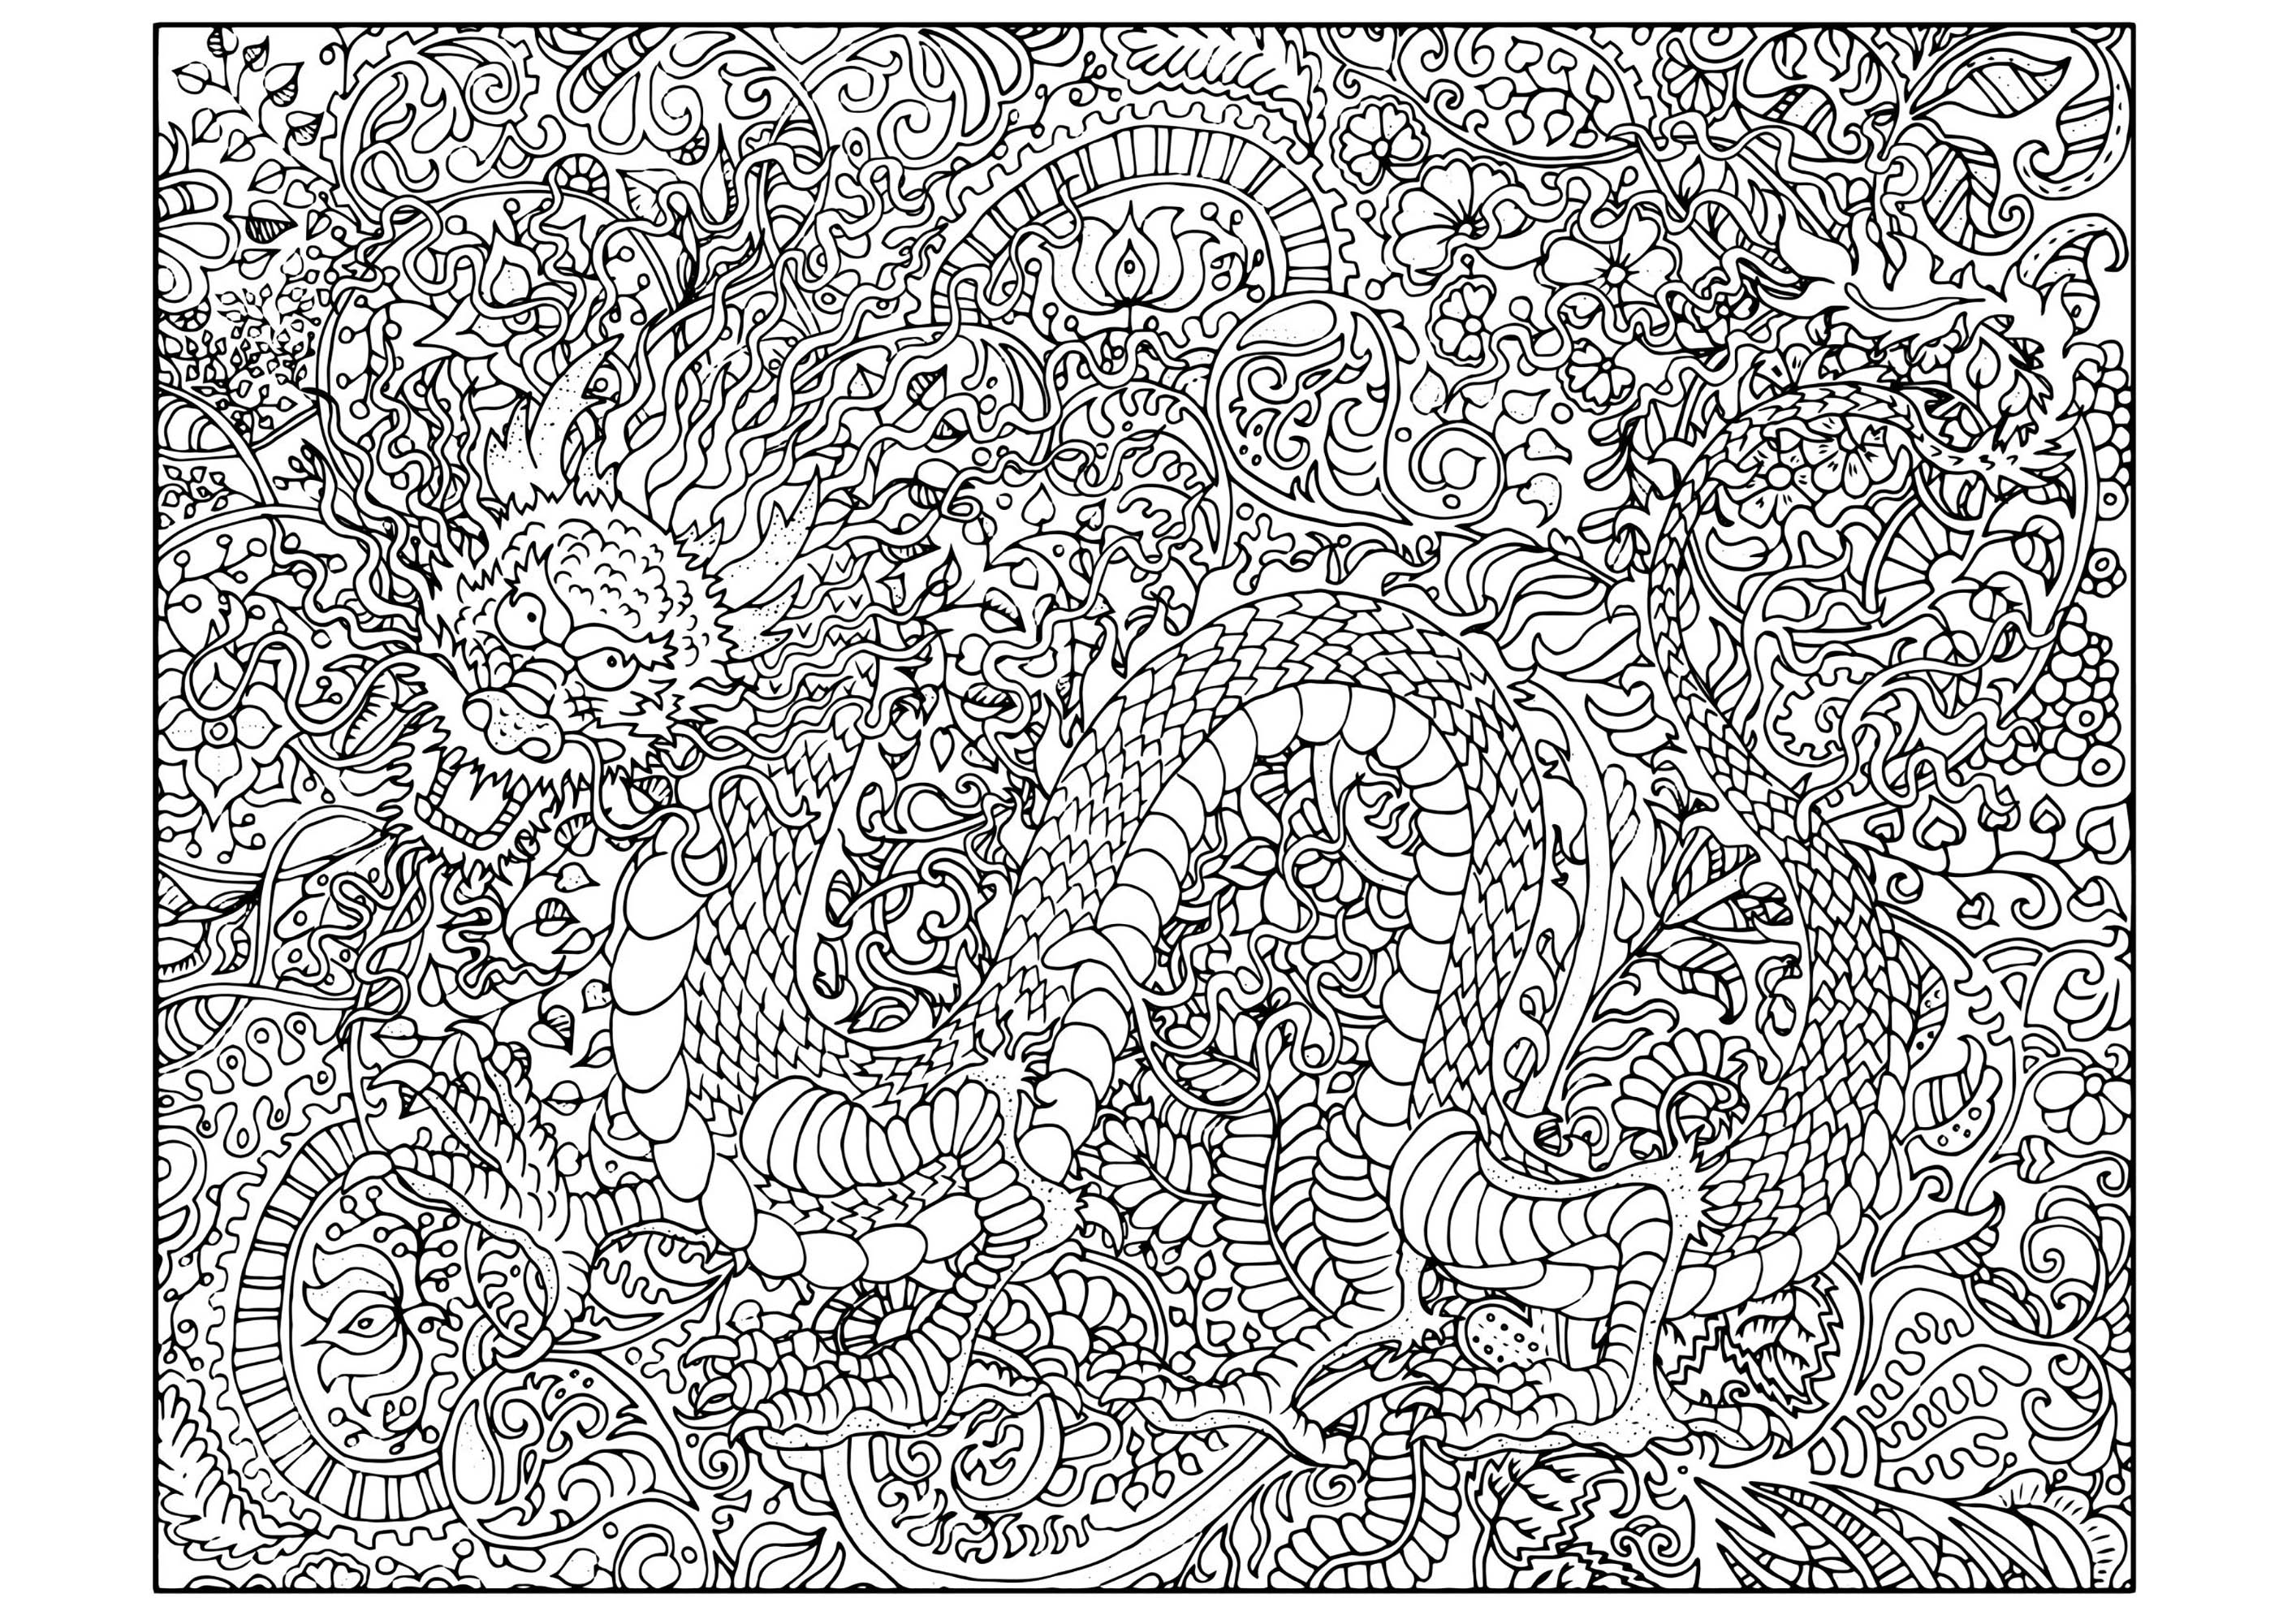 Full dragon in a complex coloring page, with background full of details and patterns, Source : 123rf   Artist : Vera Petruk